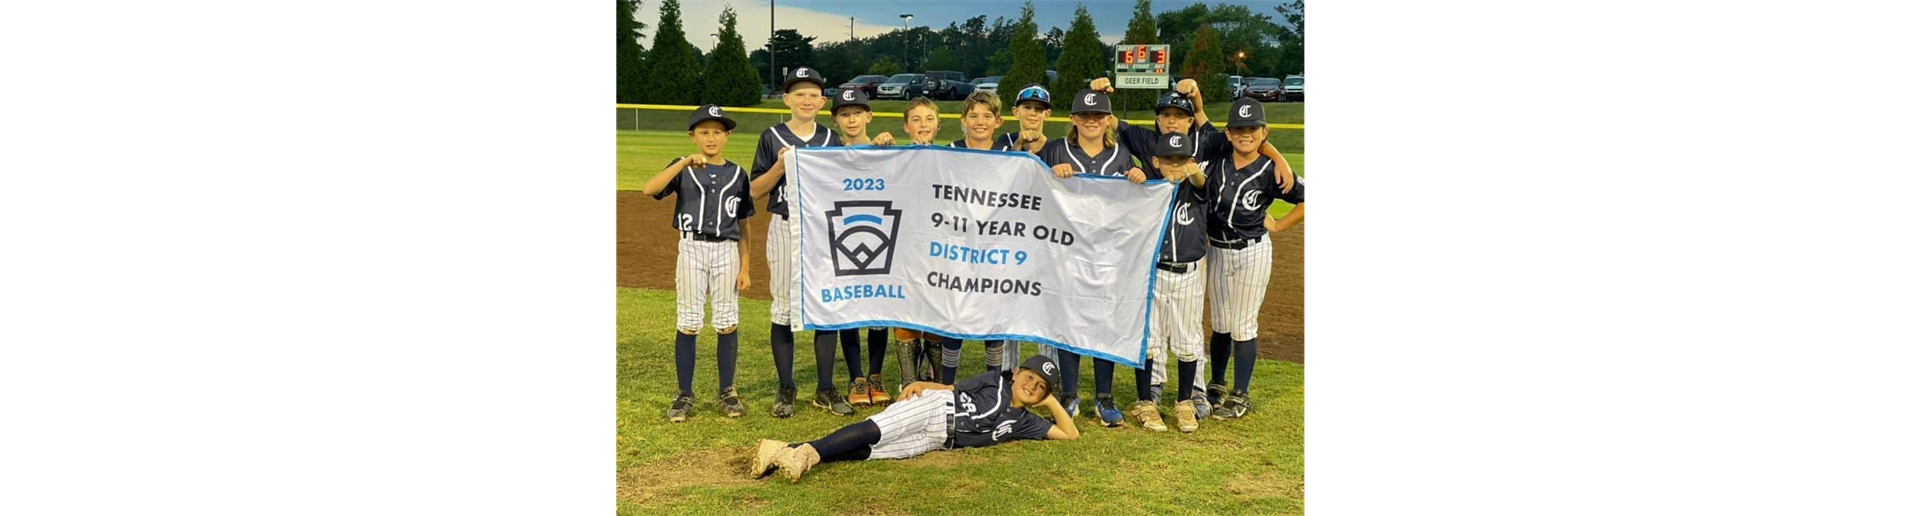 2023 District 9 9-11 year old Champs